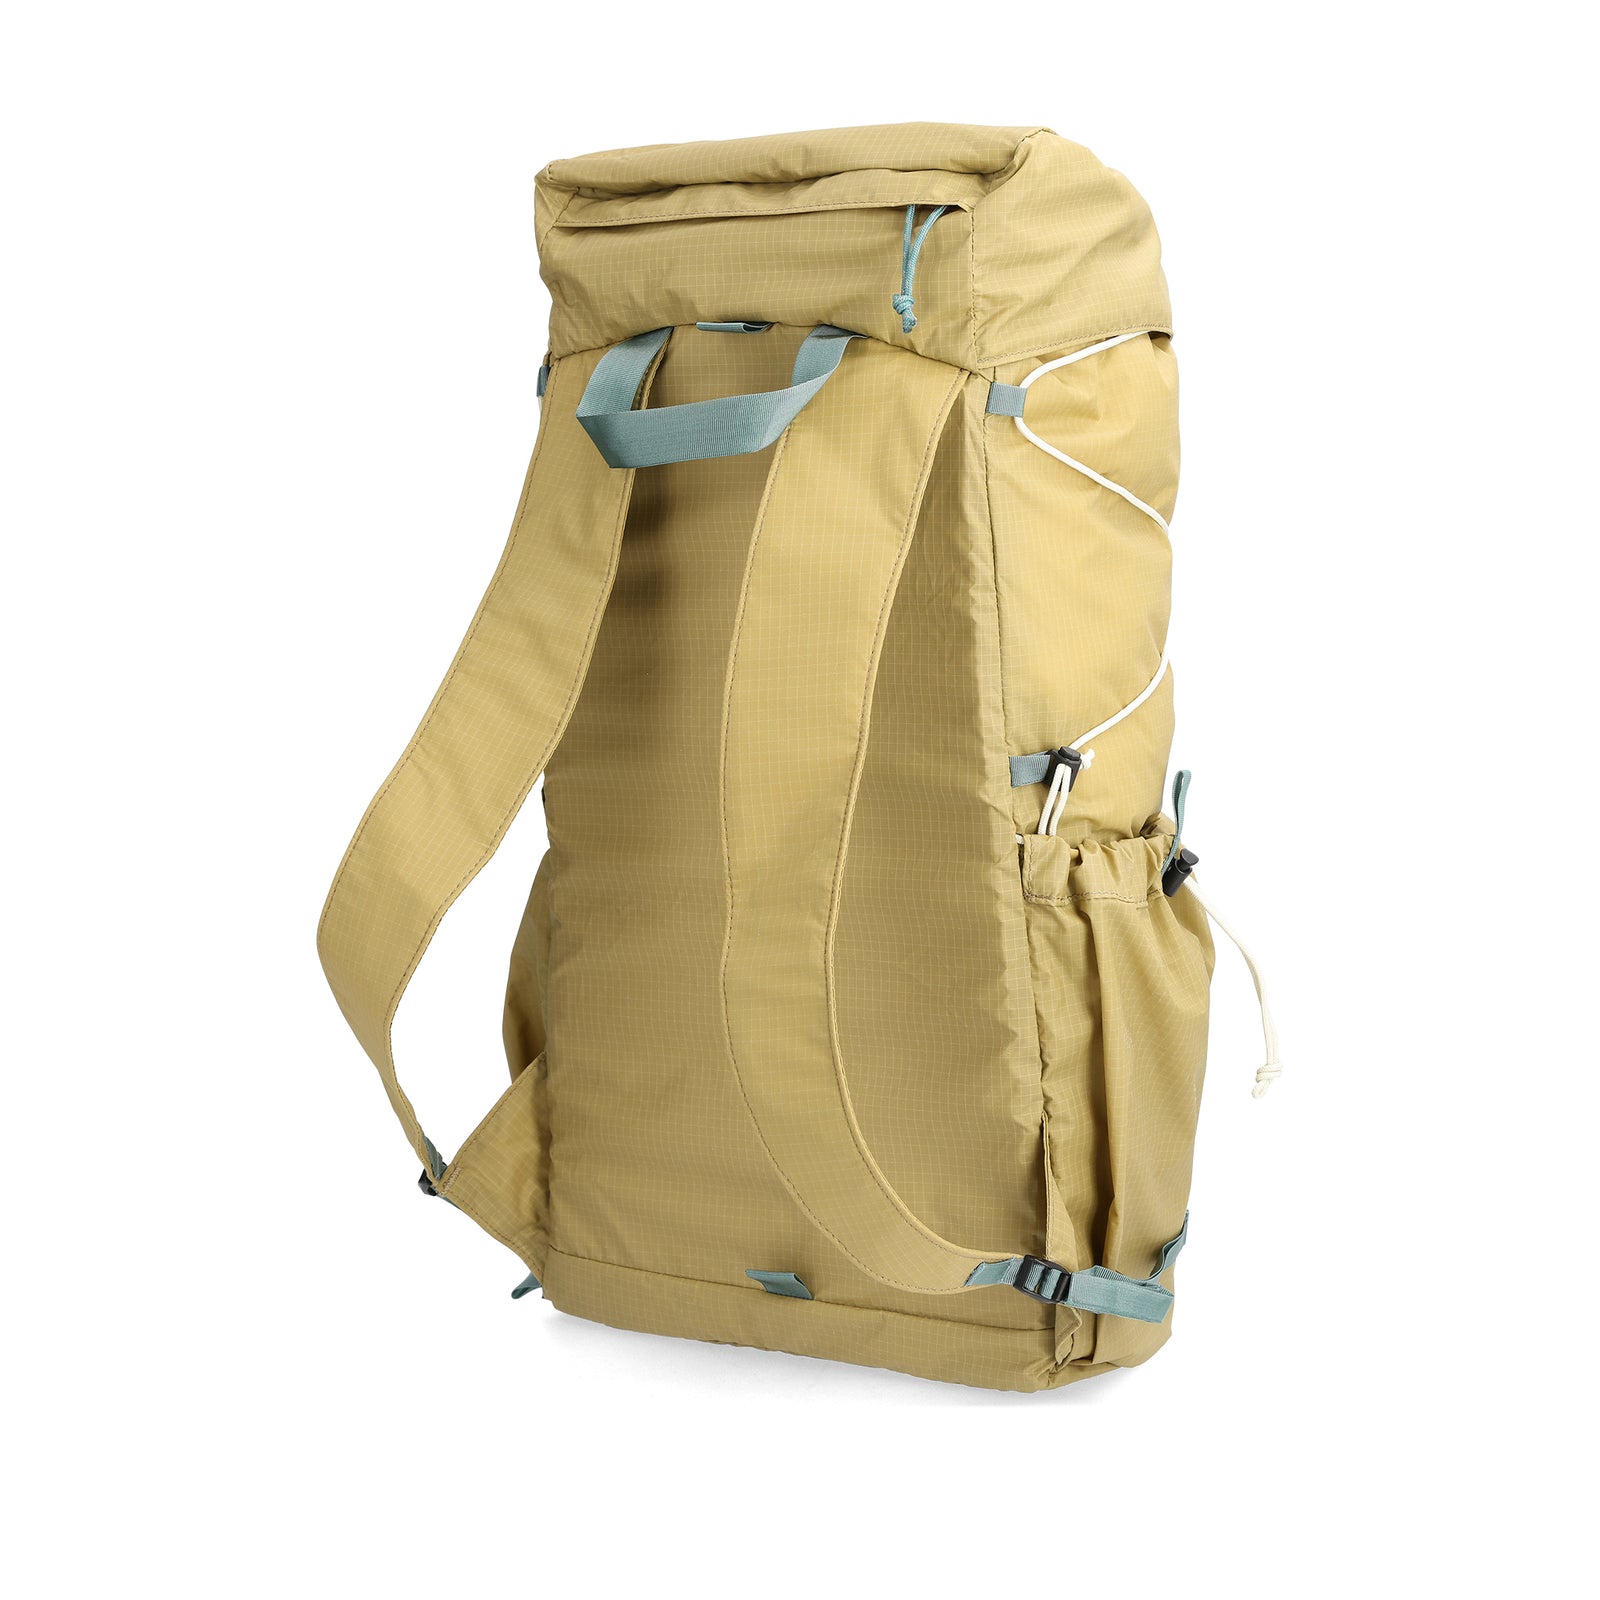 Back View of Topo Designs Topolite™ Cinch Pack 16L in "Moss"